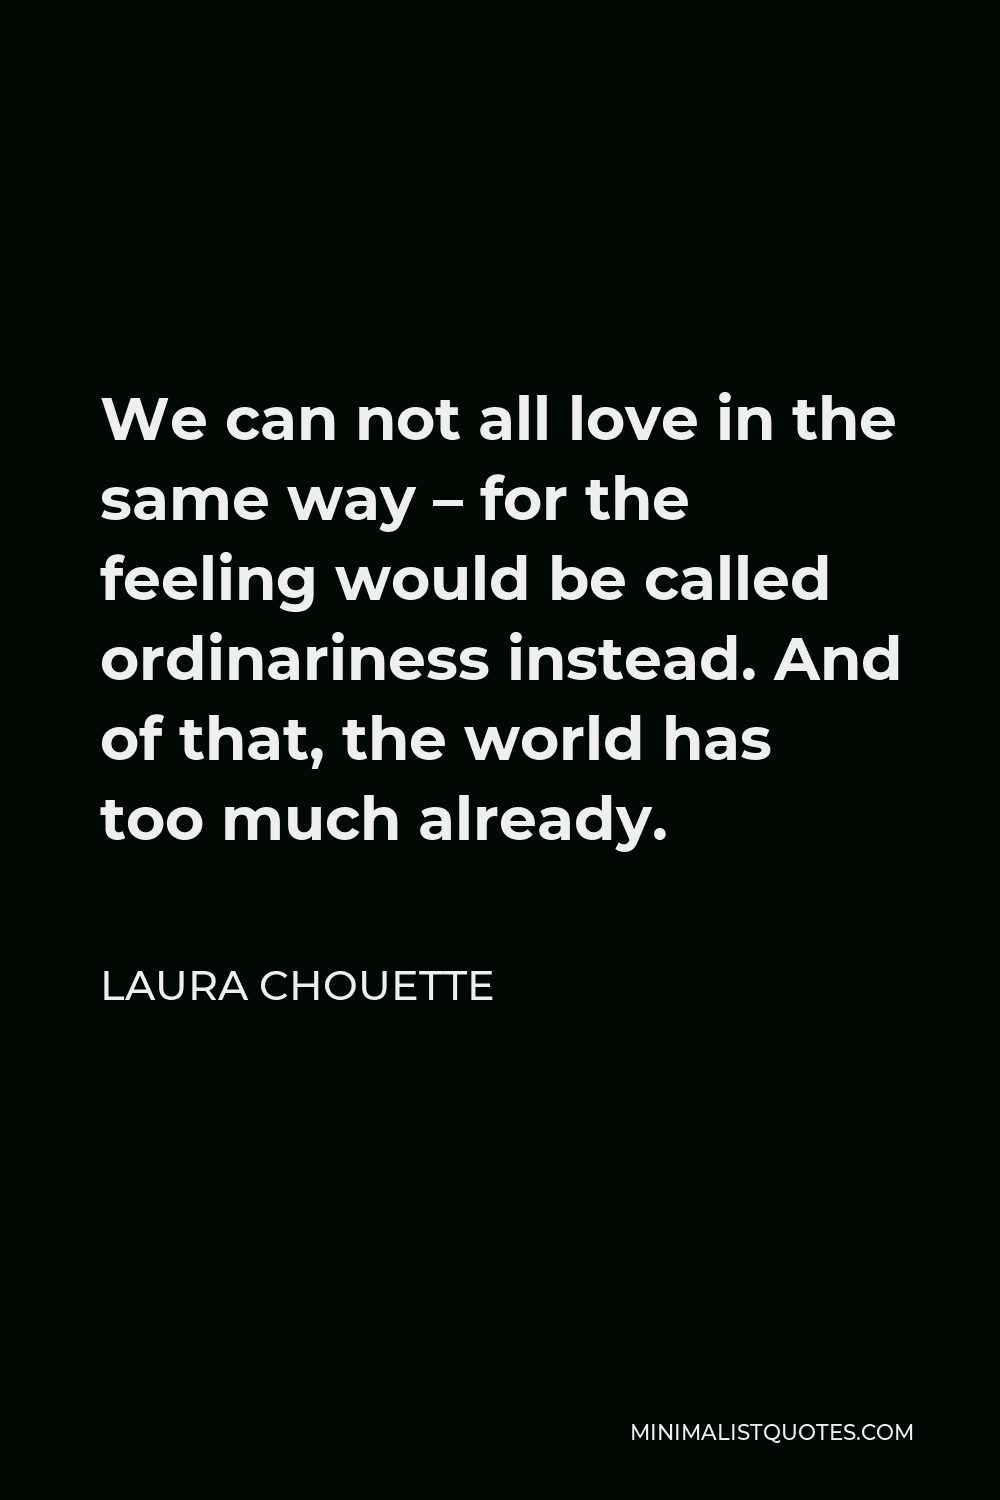 Laura Chouette Quote - We can not all love in the same way – for the feeling would be called ordinariness instead. And of that, the world has too much already.